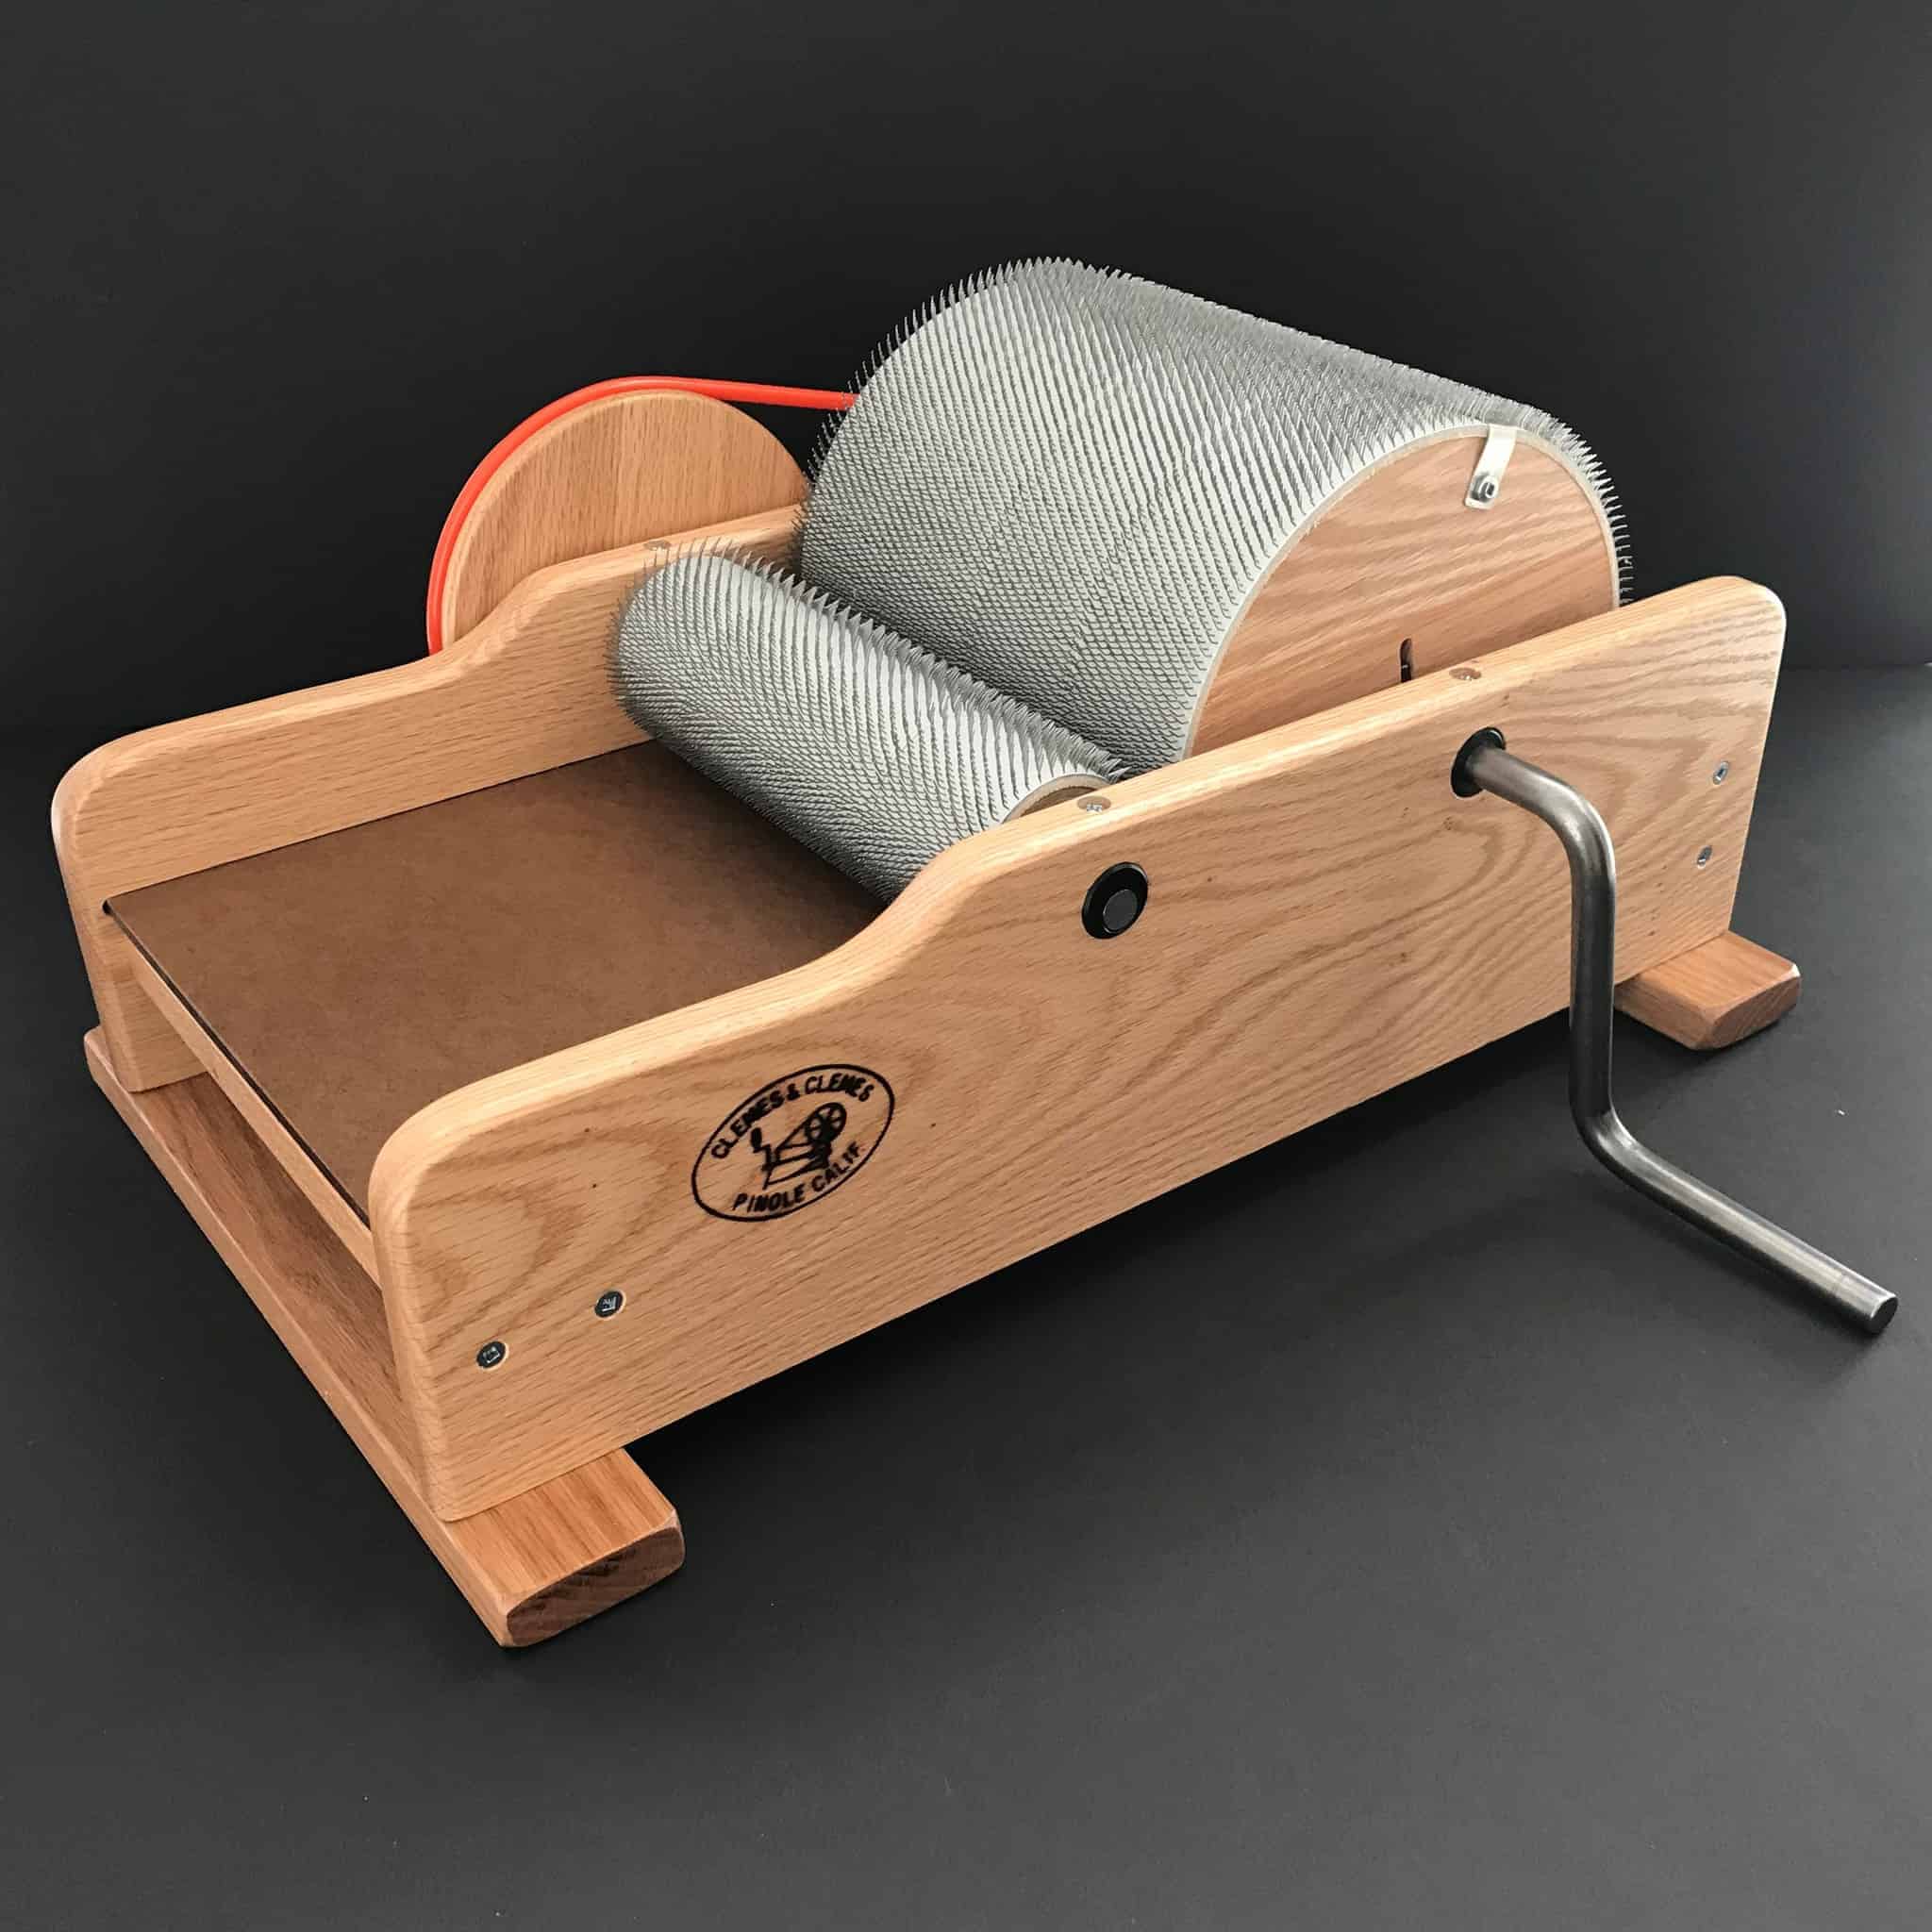 Standard Drum Carder  Clemes & Clemes, Inc.